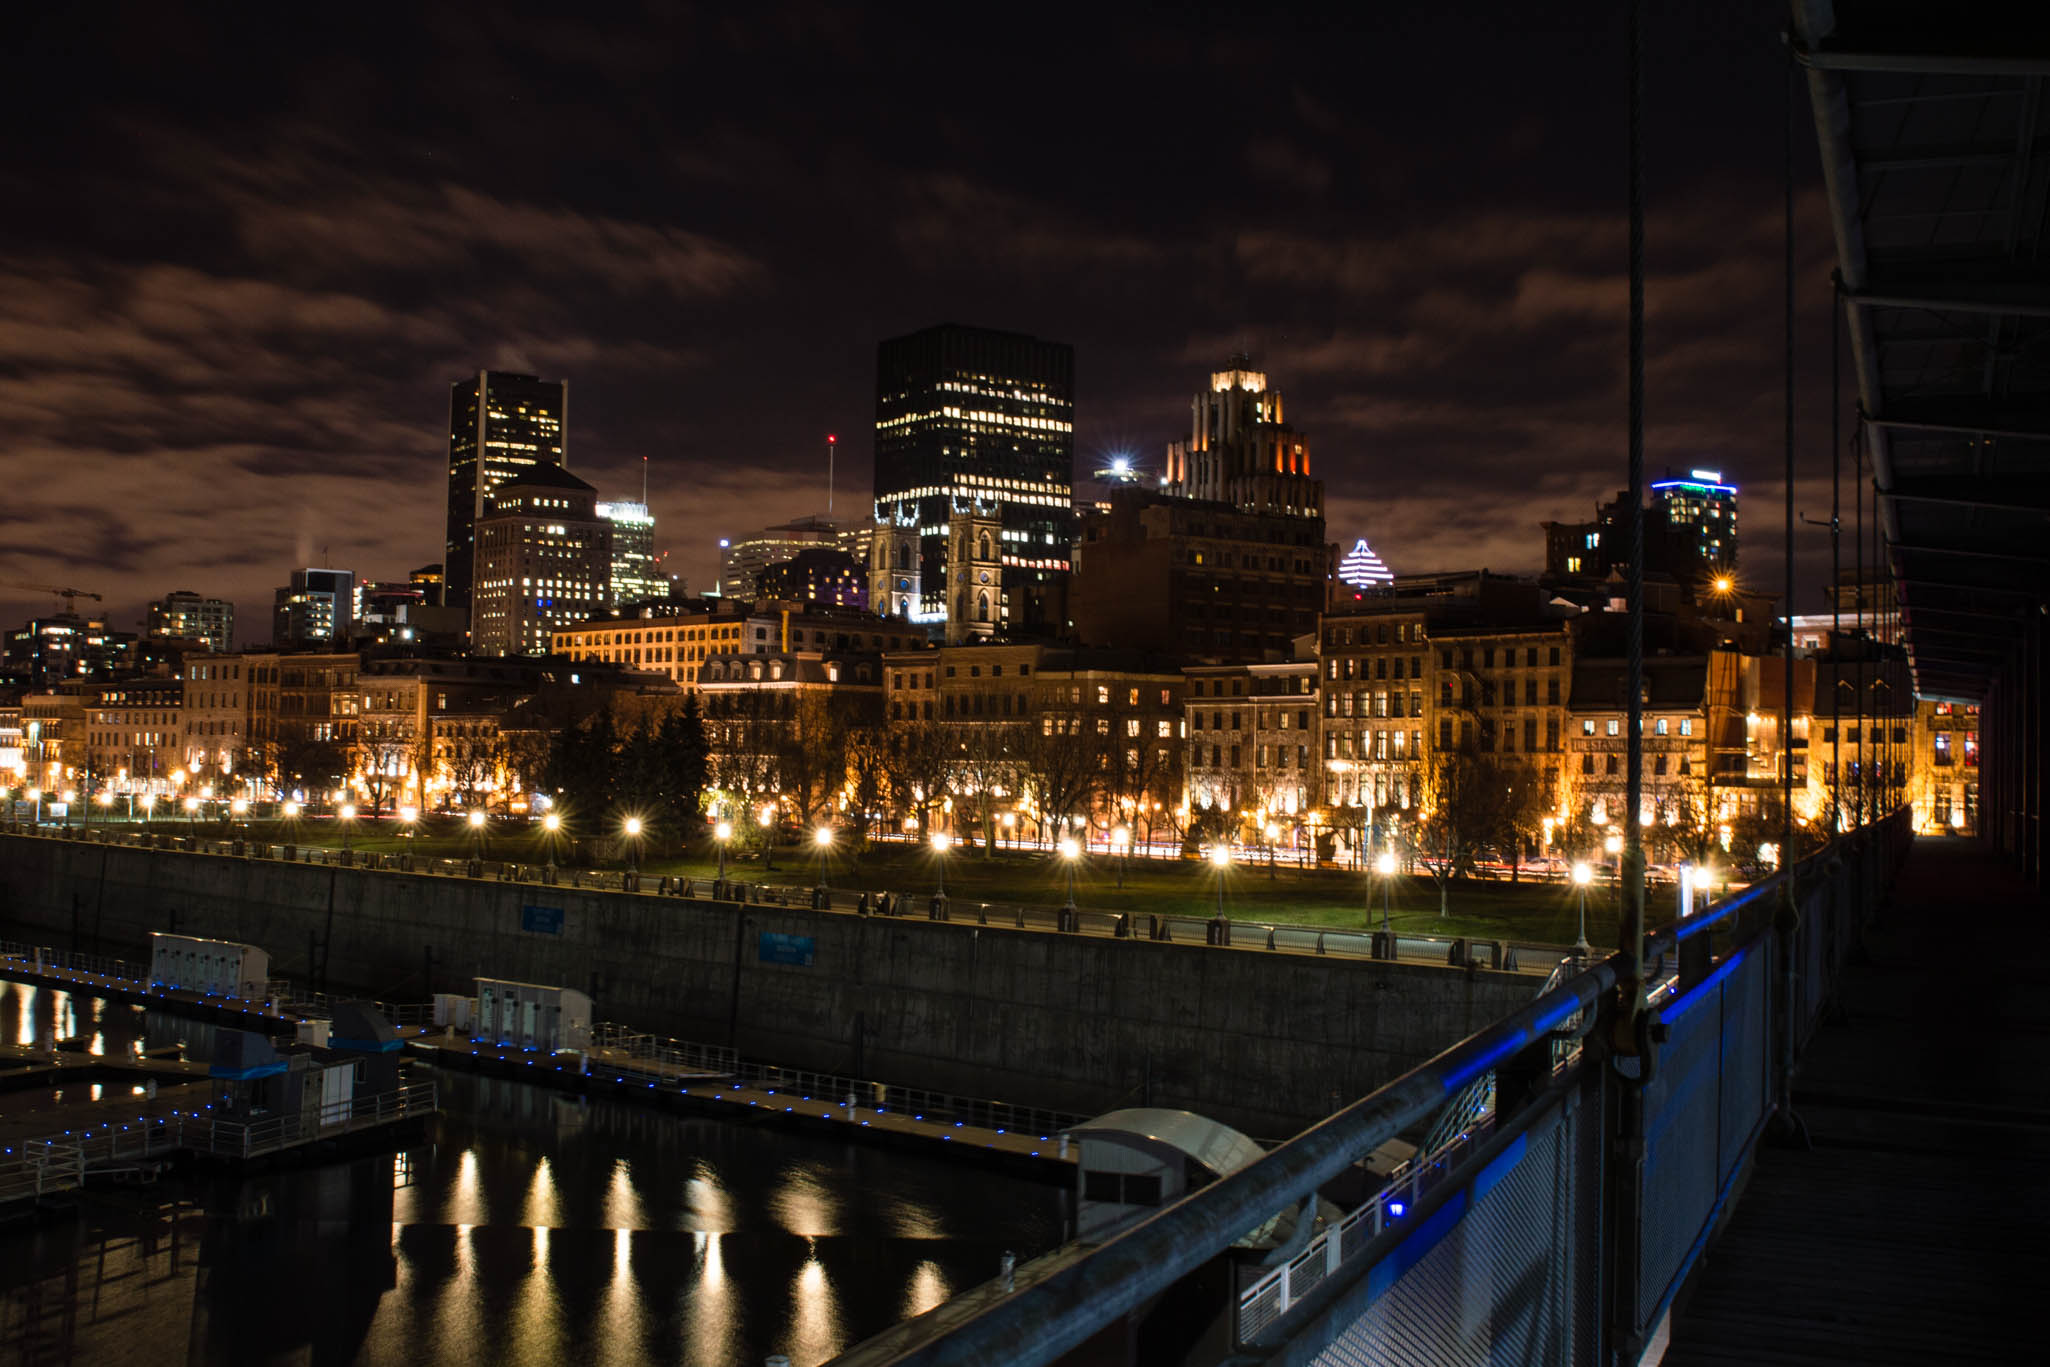 View of the City Skyline at Night from the Old Port in Montreal, Canada